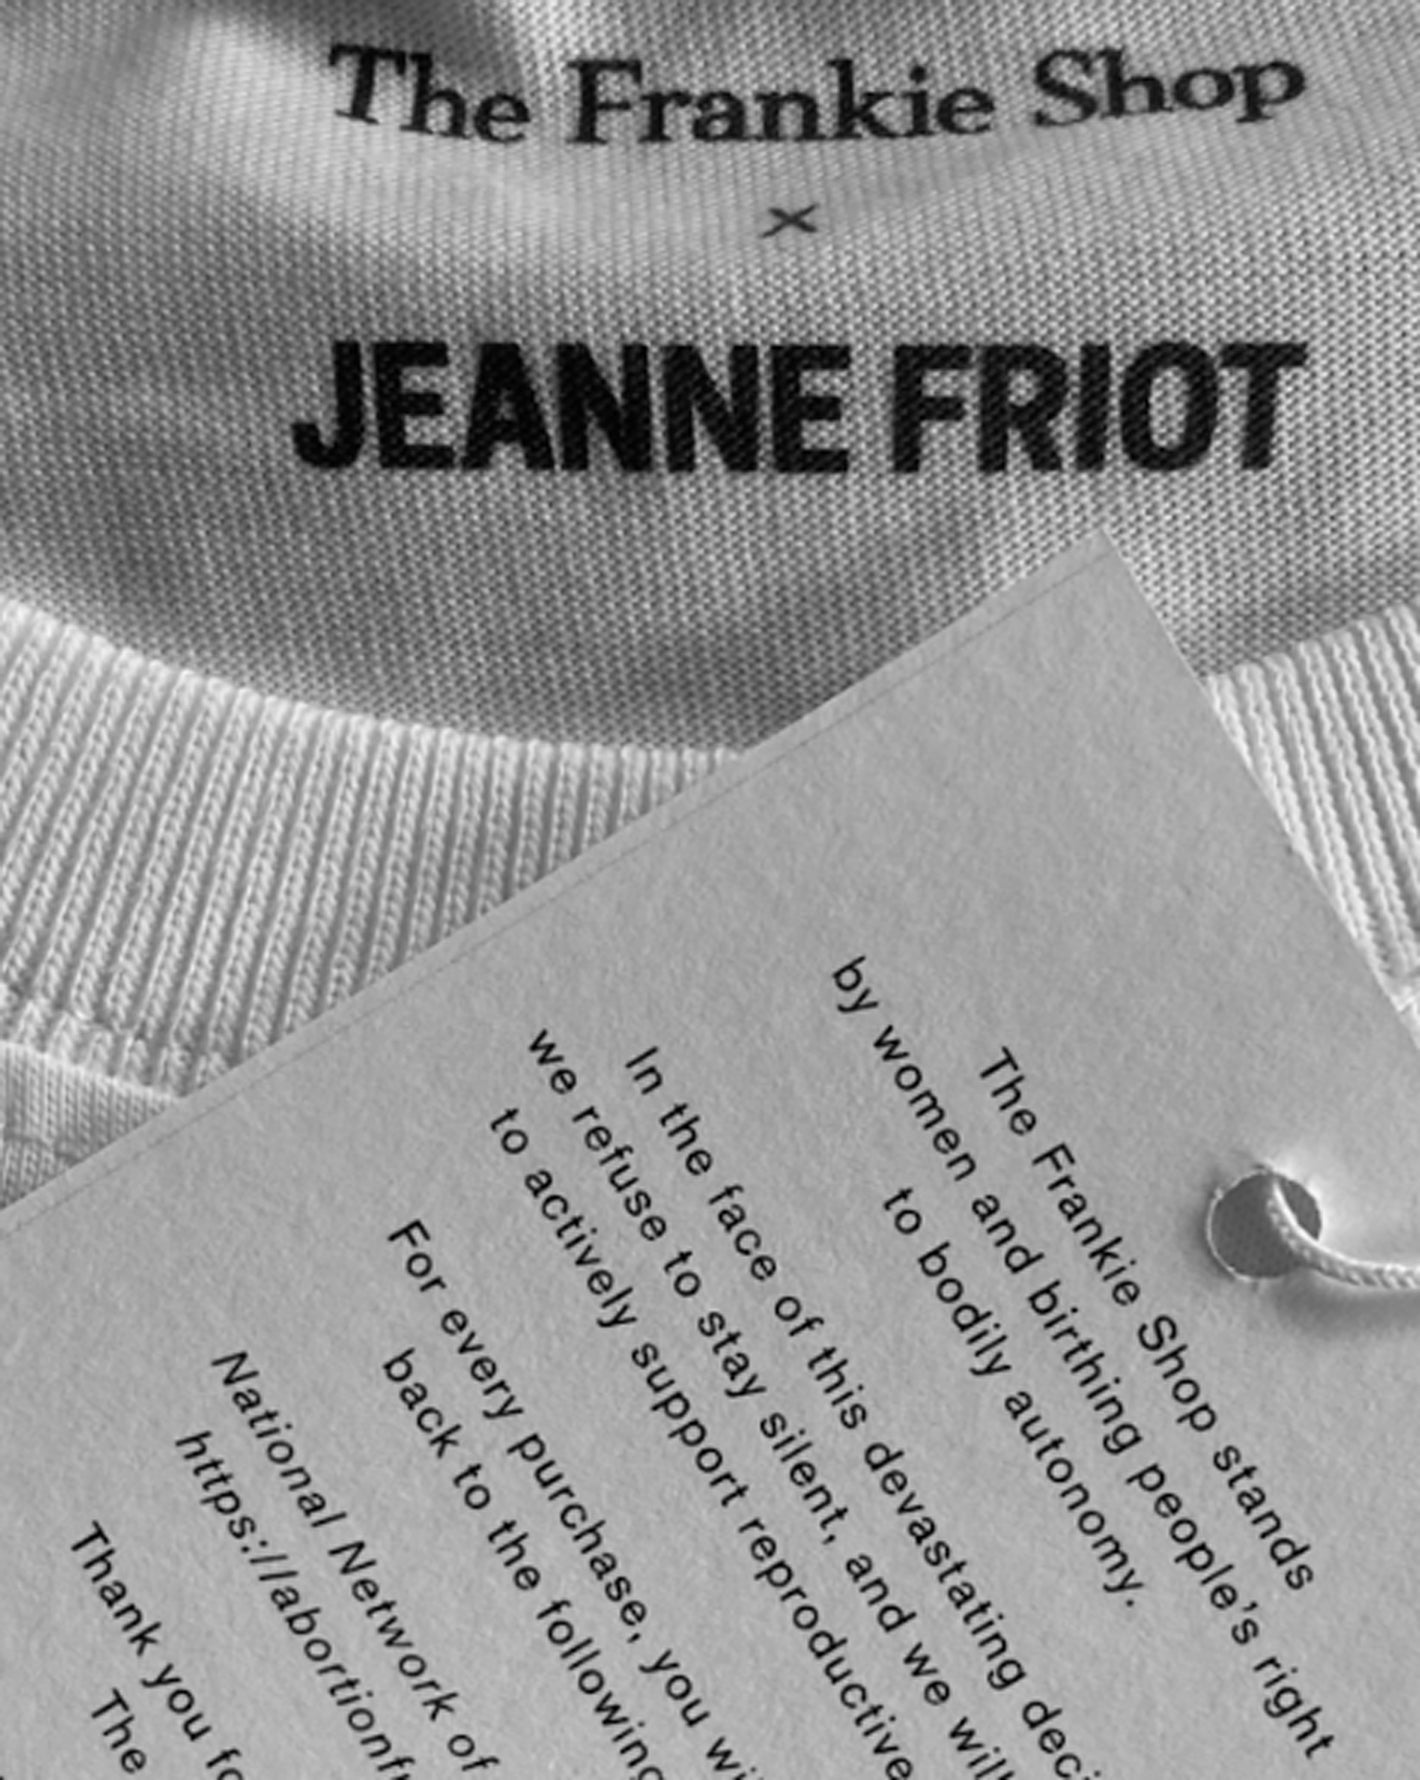 Close up of the t-shirt tag that says "The Frankie Shop" x Jeanne Friot. 